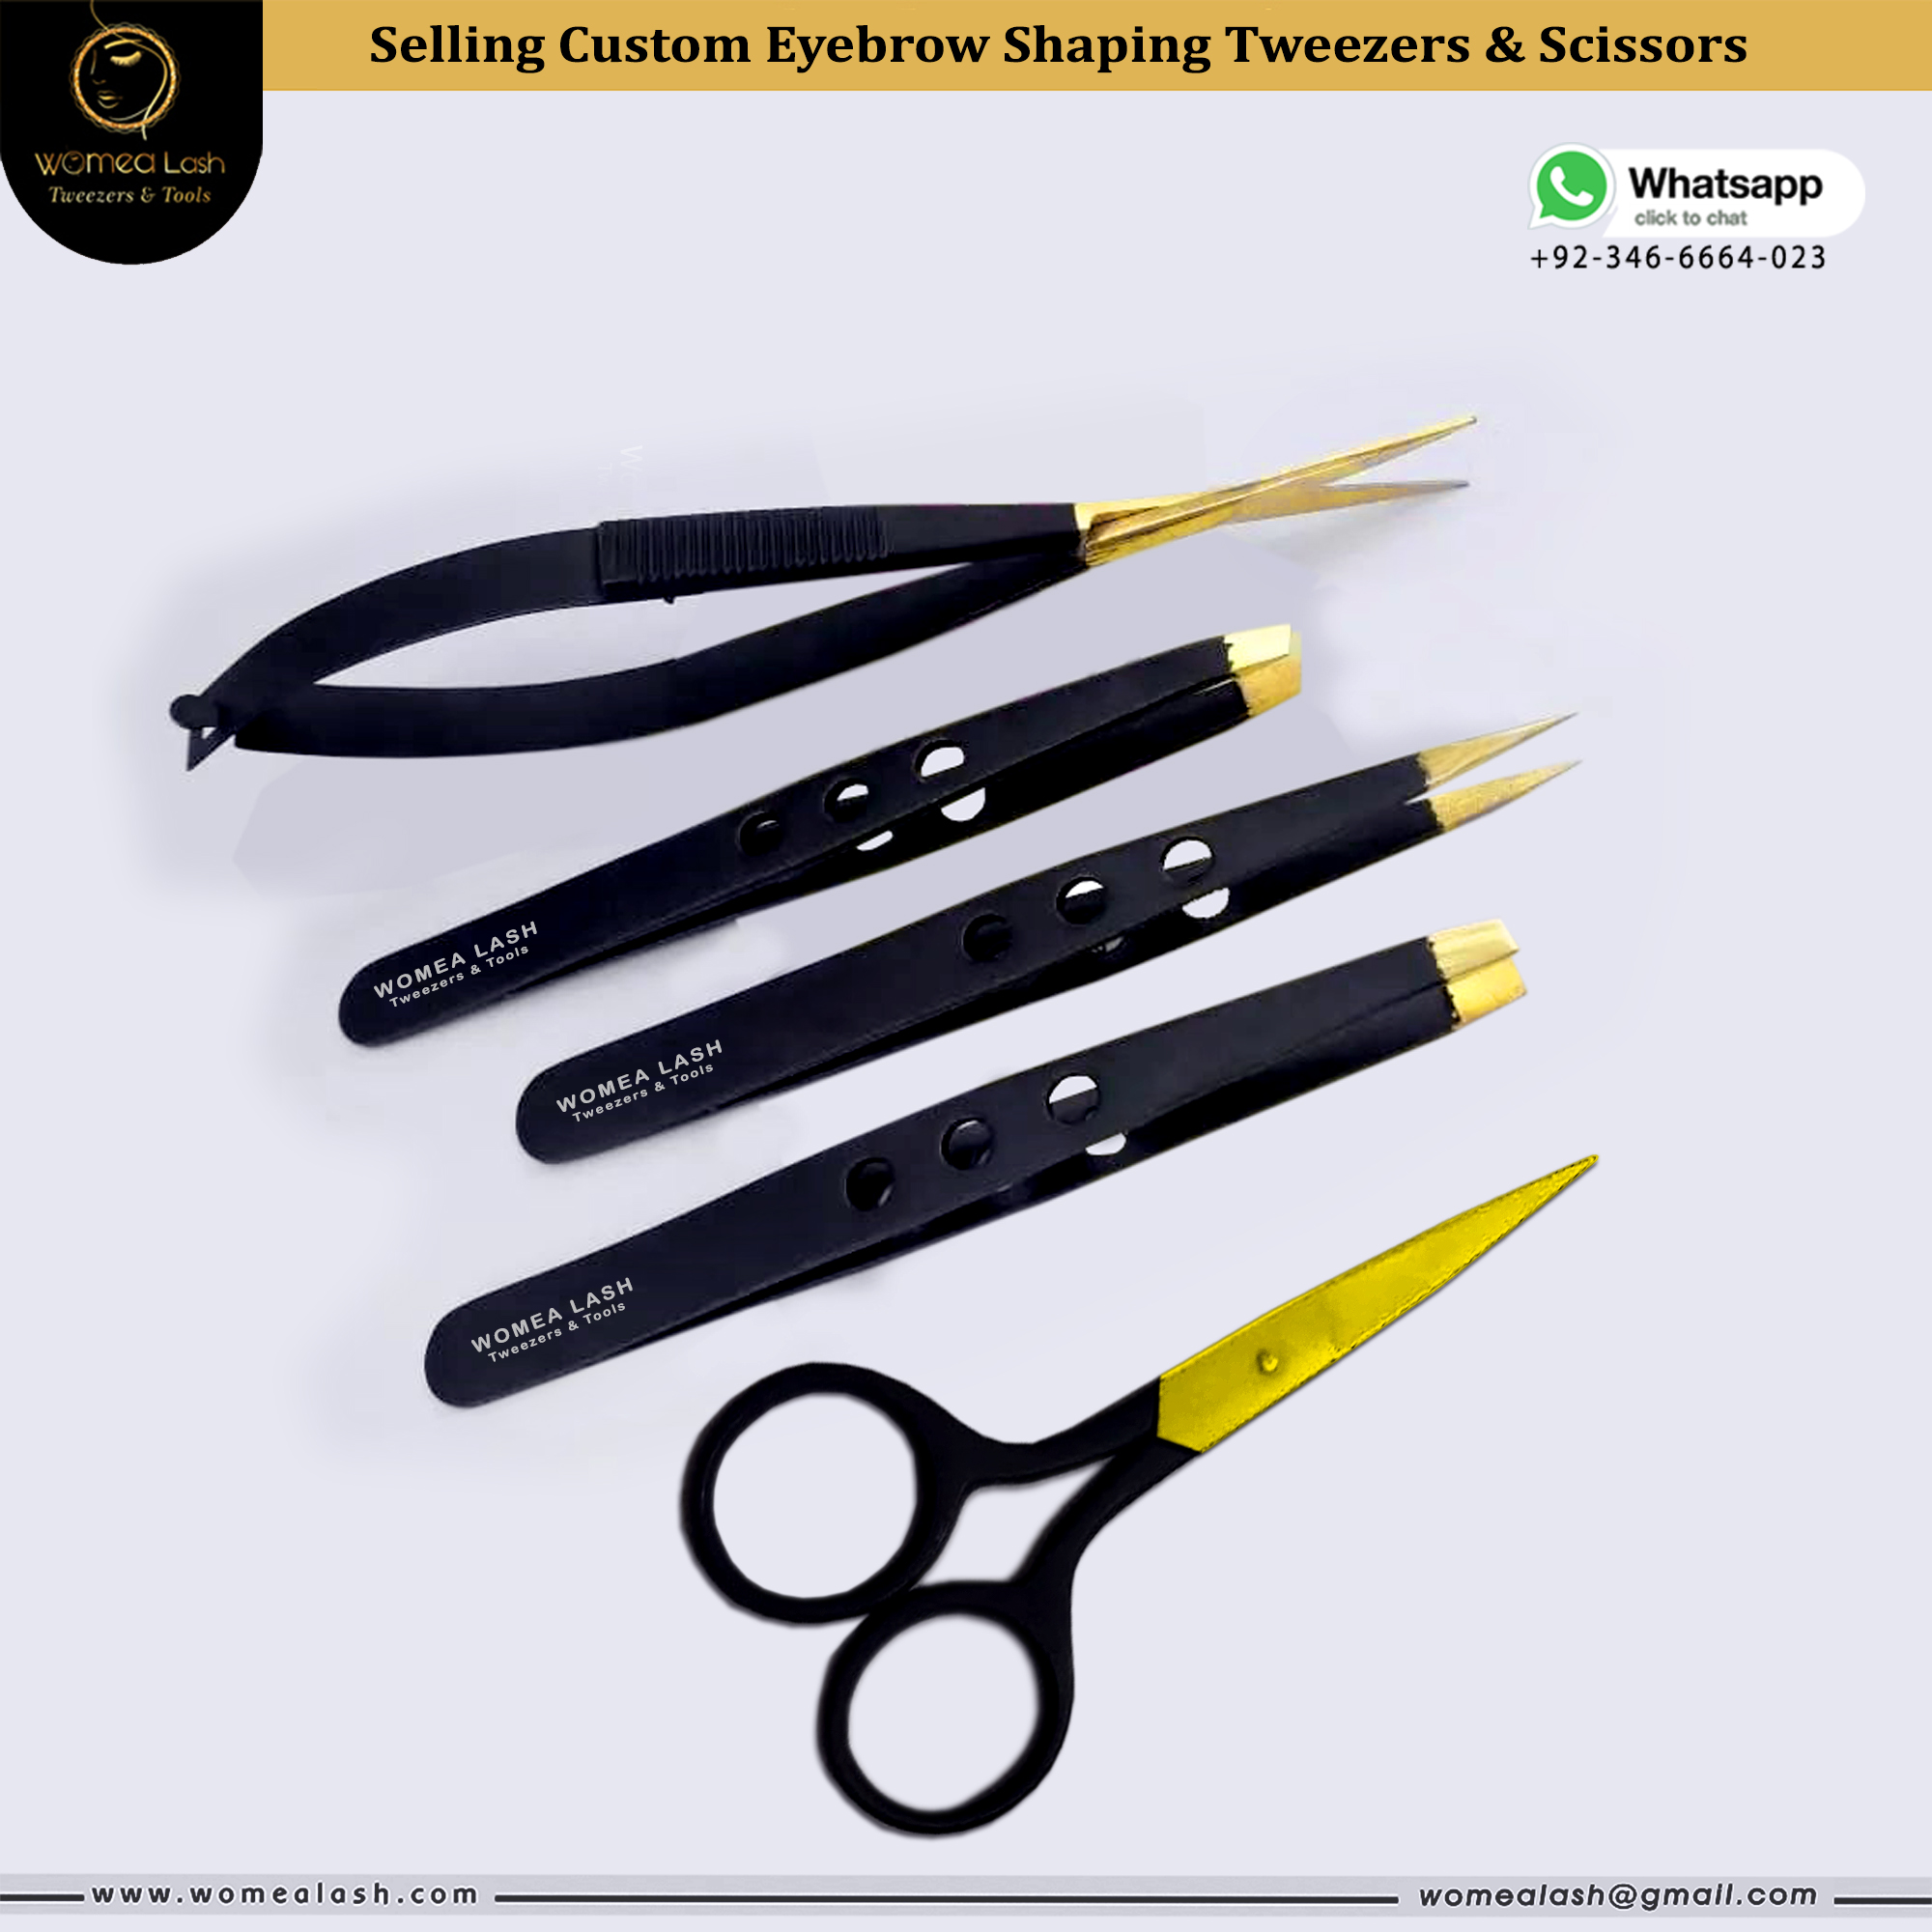 Selling Custom Eyebrow Tweezers & Scissors Say Goodbye to all your Messy Facial Hair Game Strong with our 5-piece set